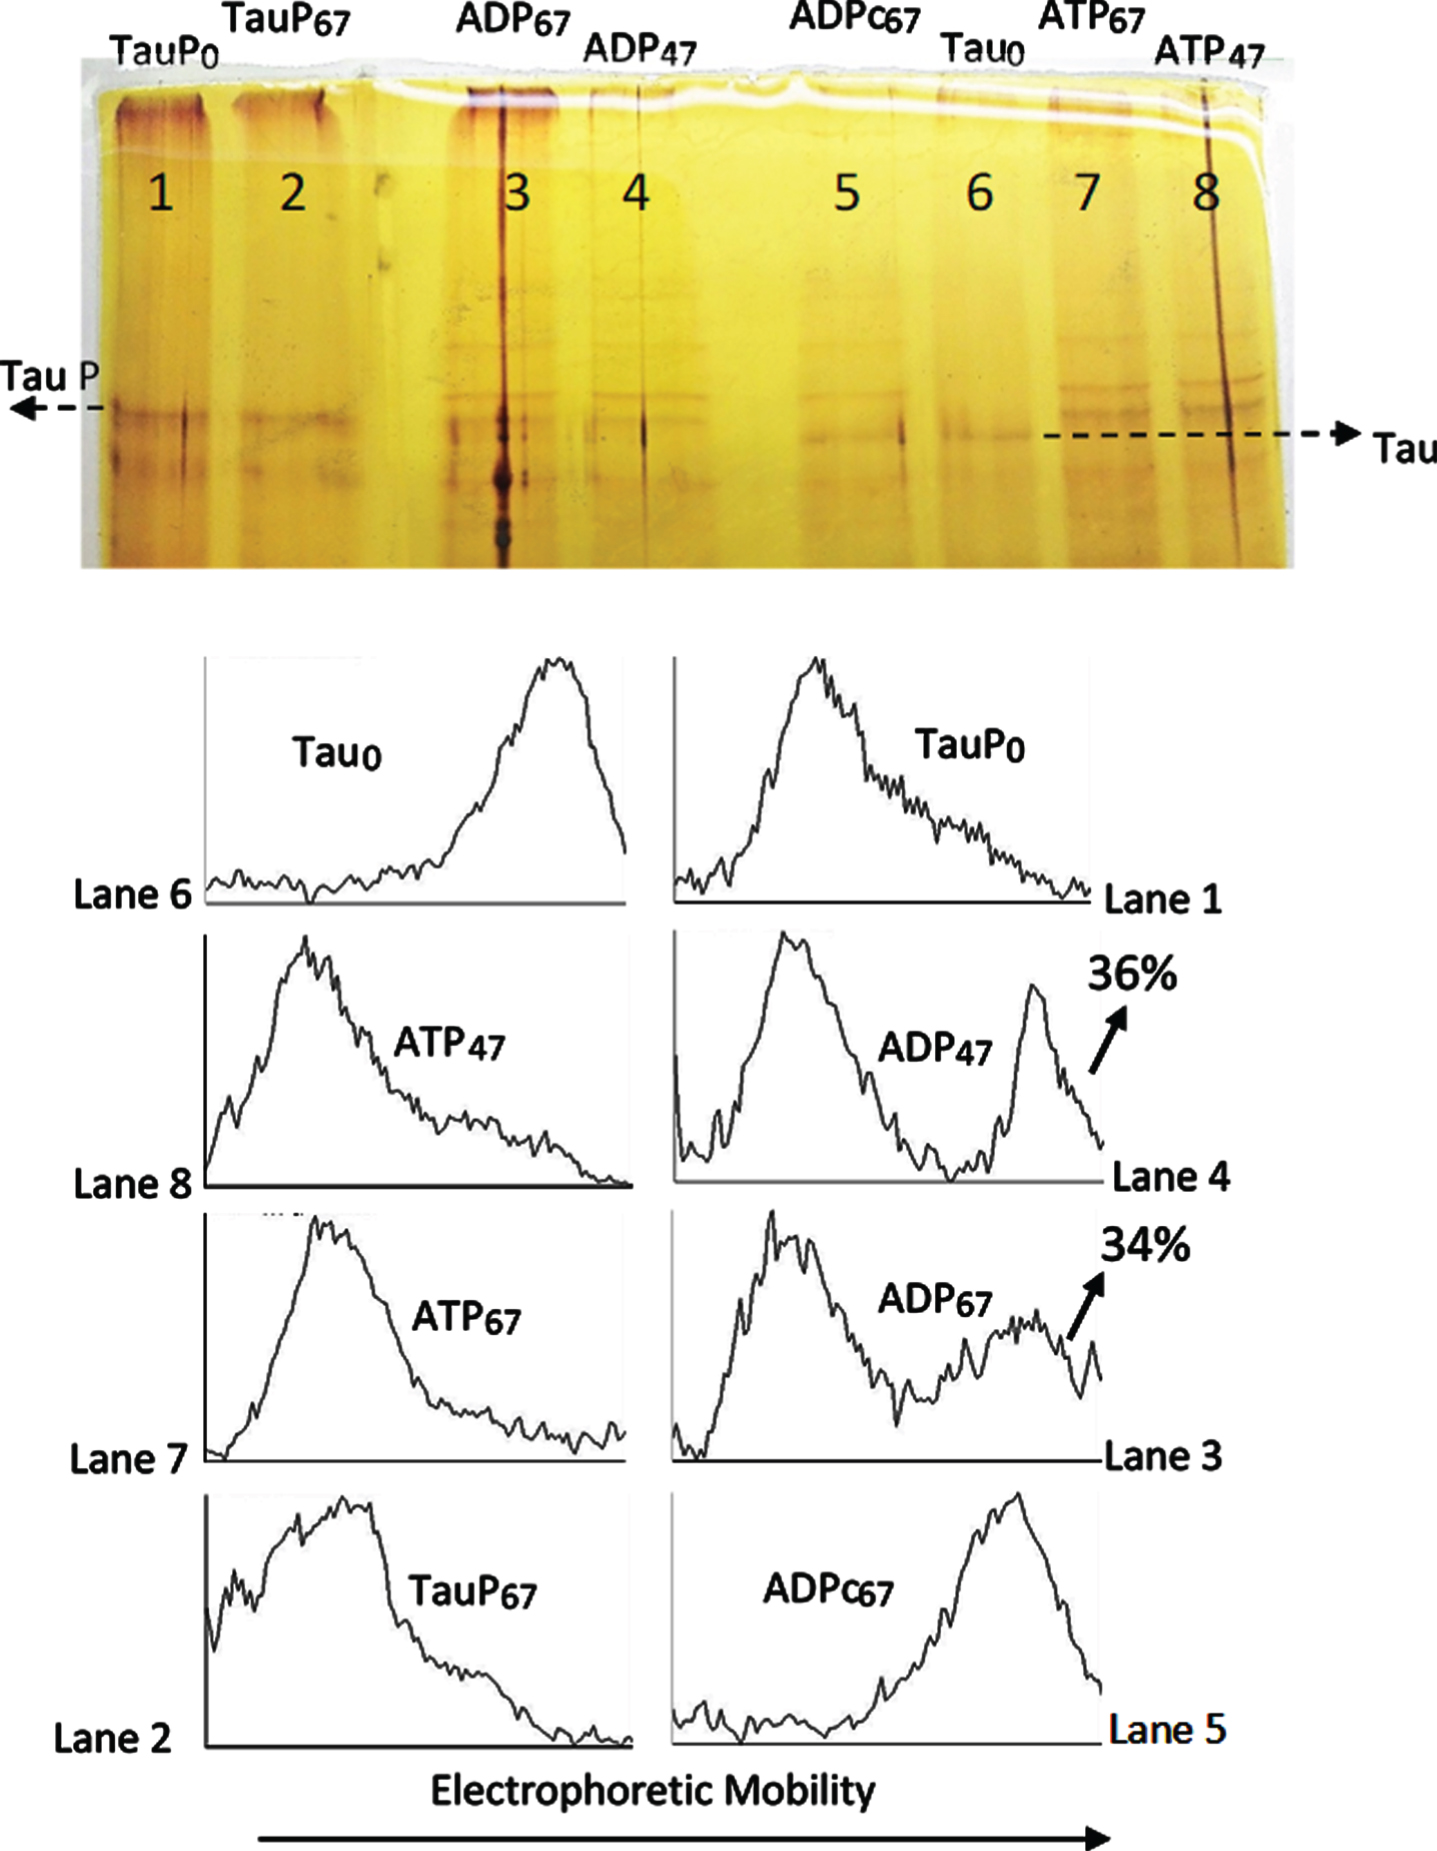 Silver stained of tau and phosphorylated tau separated by SDS-PAGE (8% acrylamide). Lanes 5–8: Tau protein (2.4 μg/ml final concentration) was diluted in a buffer composed of 31 μl of 10 mM Hepes, 0.15 M KCl, 0.25 mM 2-mercaptoethanol, 15 mM MgCl2, and 0.1 mg/ml Ampicillin at pH 6 adjusted with KOH; plus 10 μl of 10 mM Hepes, 0.15 M NaCl at pH 7; plus 5 μl of a solution of 250 mM potassium phosphate 10 mM and 0.1 mg/ml of Ampicillin at pH 7, containing 10 mM of P1, P5-Di(adenosine-5’) pentaphosphate. This solution was incubated at 20°C in the presence of 25 mM of AMP and 2.5 mM ATP for 47 h (lane 8) and 67 h (lane 7) or 2.5 mM ADP for 67 h (lane 5) and 4 units of C-PKA (Promega); lane 6 is a control in the absence of C-PKA, without incubation. Lanes 1–4: Phosphorylated tau (TauP) (1.8 μg/ml, final concentration) was diluted similarly to tau and incubated at 20°C with 2.5 mM ADP and 4 units of C-PKA for 47 h (lane 4) and 67 h (lane 3); dephosphorylation percentages of TauP are indicated. Lane 1 is a control in the absence of C-PKA, without incubation. Lane 2 is a control of TauP incubated for 67 h in the presence of ADP but in the absence of C-PKA. Tau and TauP samples were boiled before use.